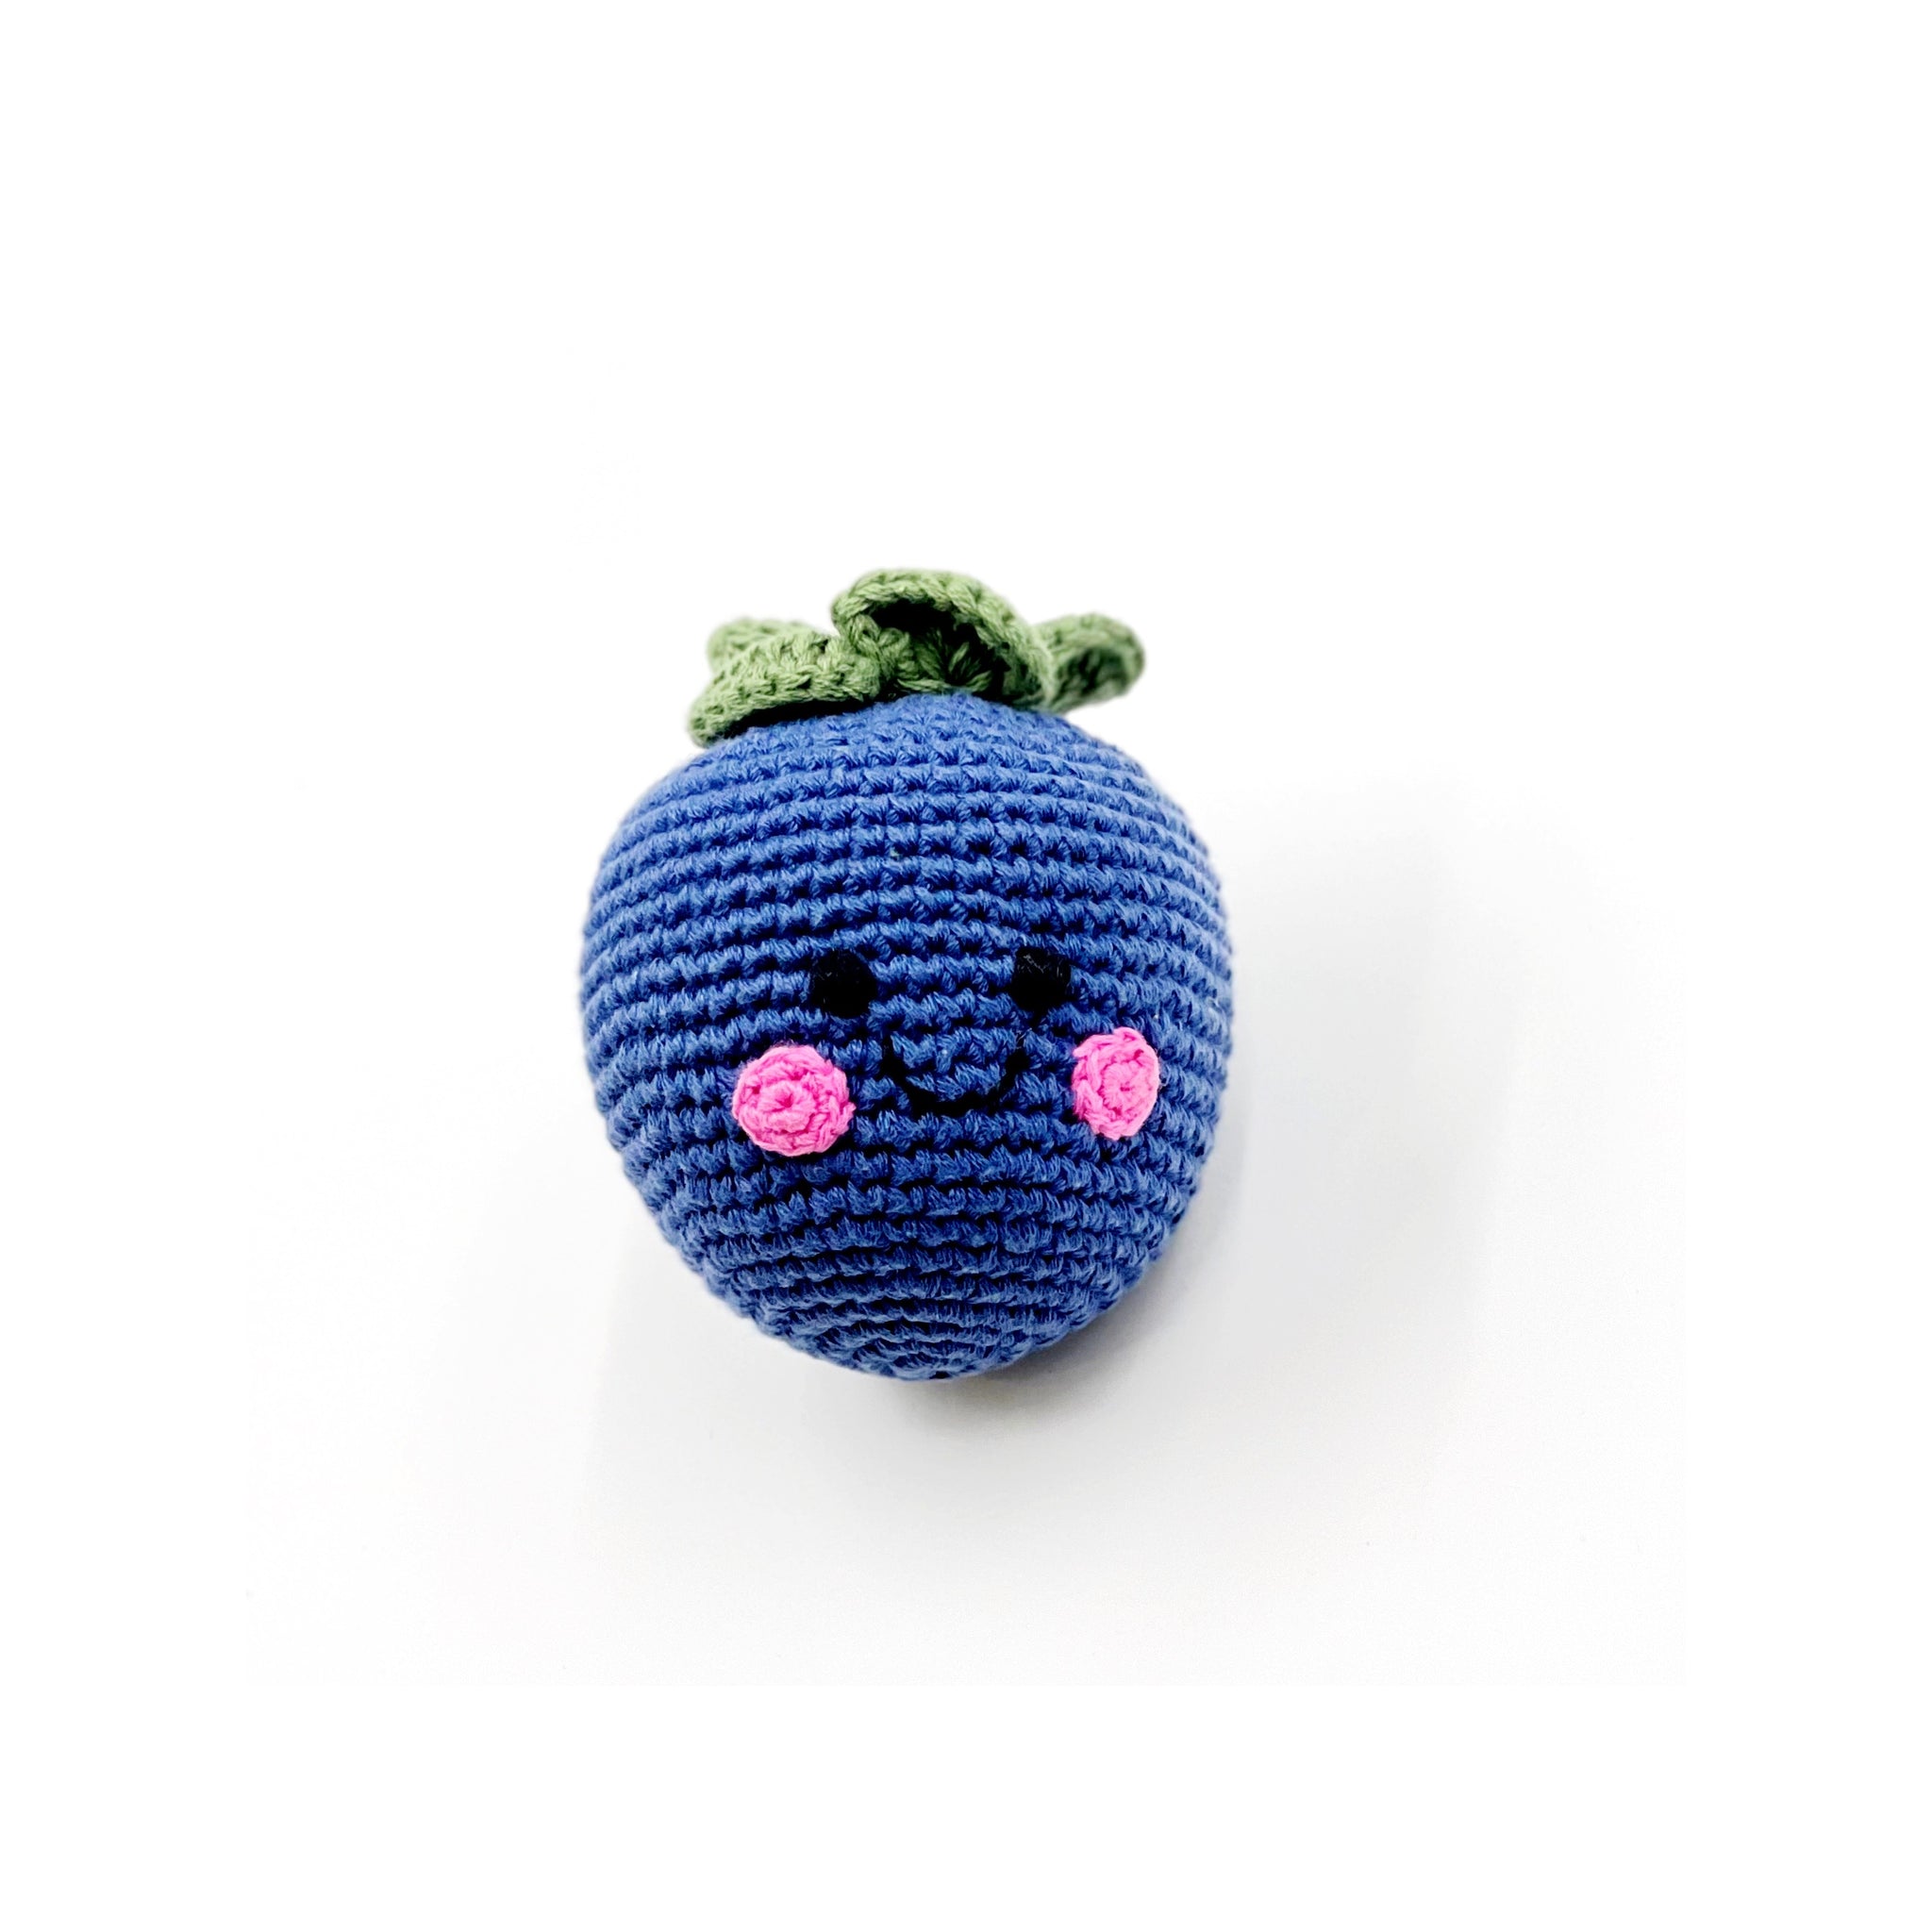 Handmade Crochet Blueberry Baby Toy Rattle with Green Top and Pink Cheeks